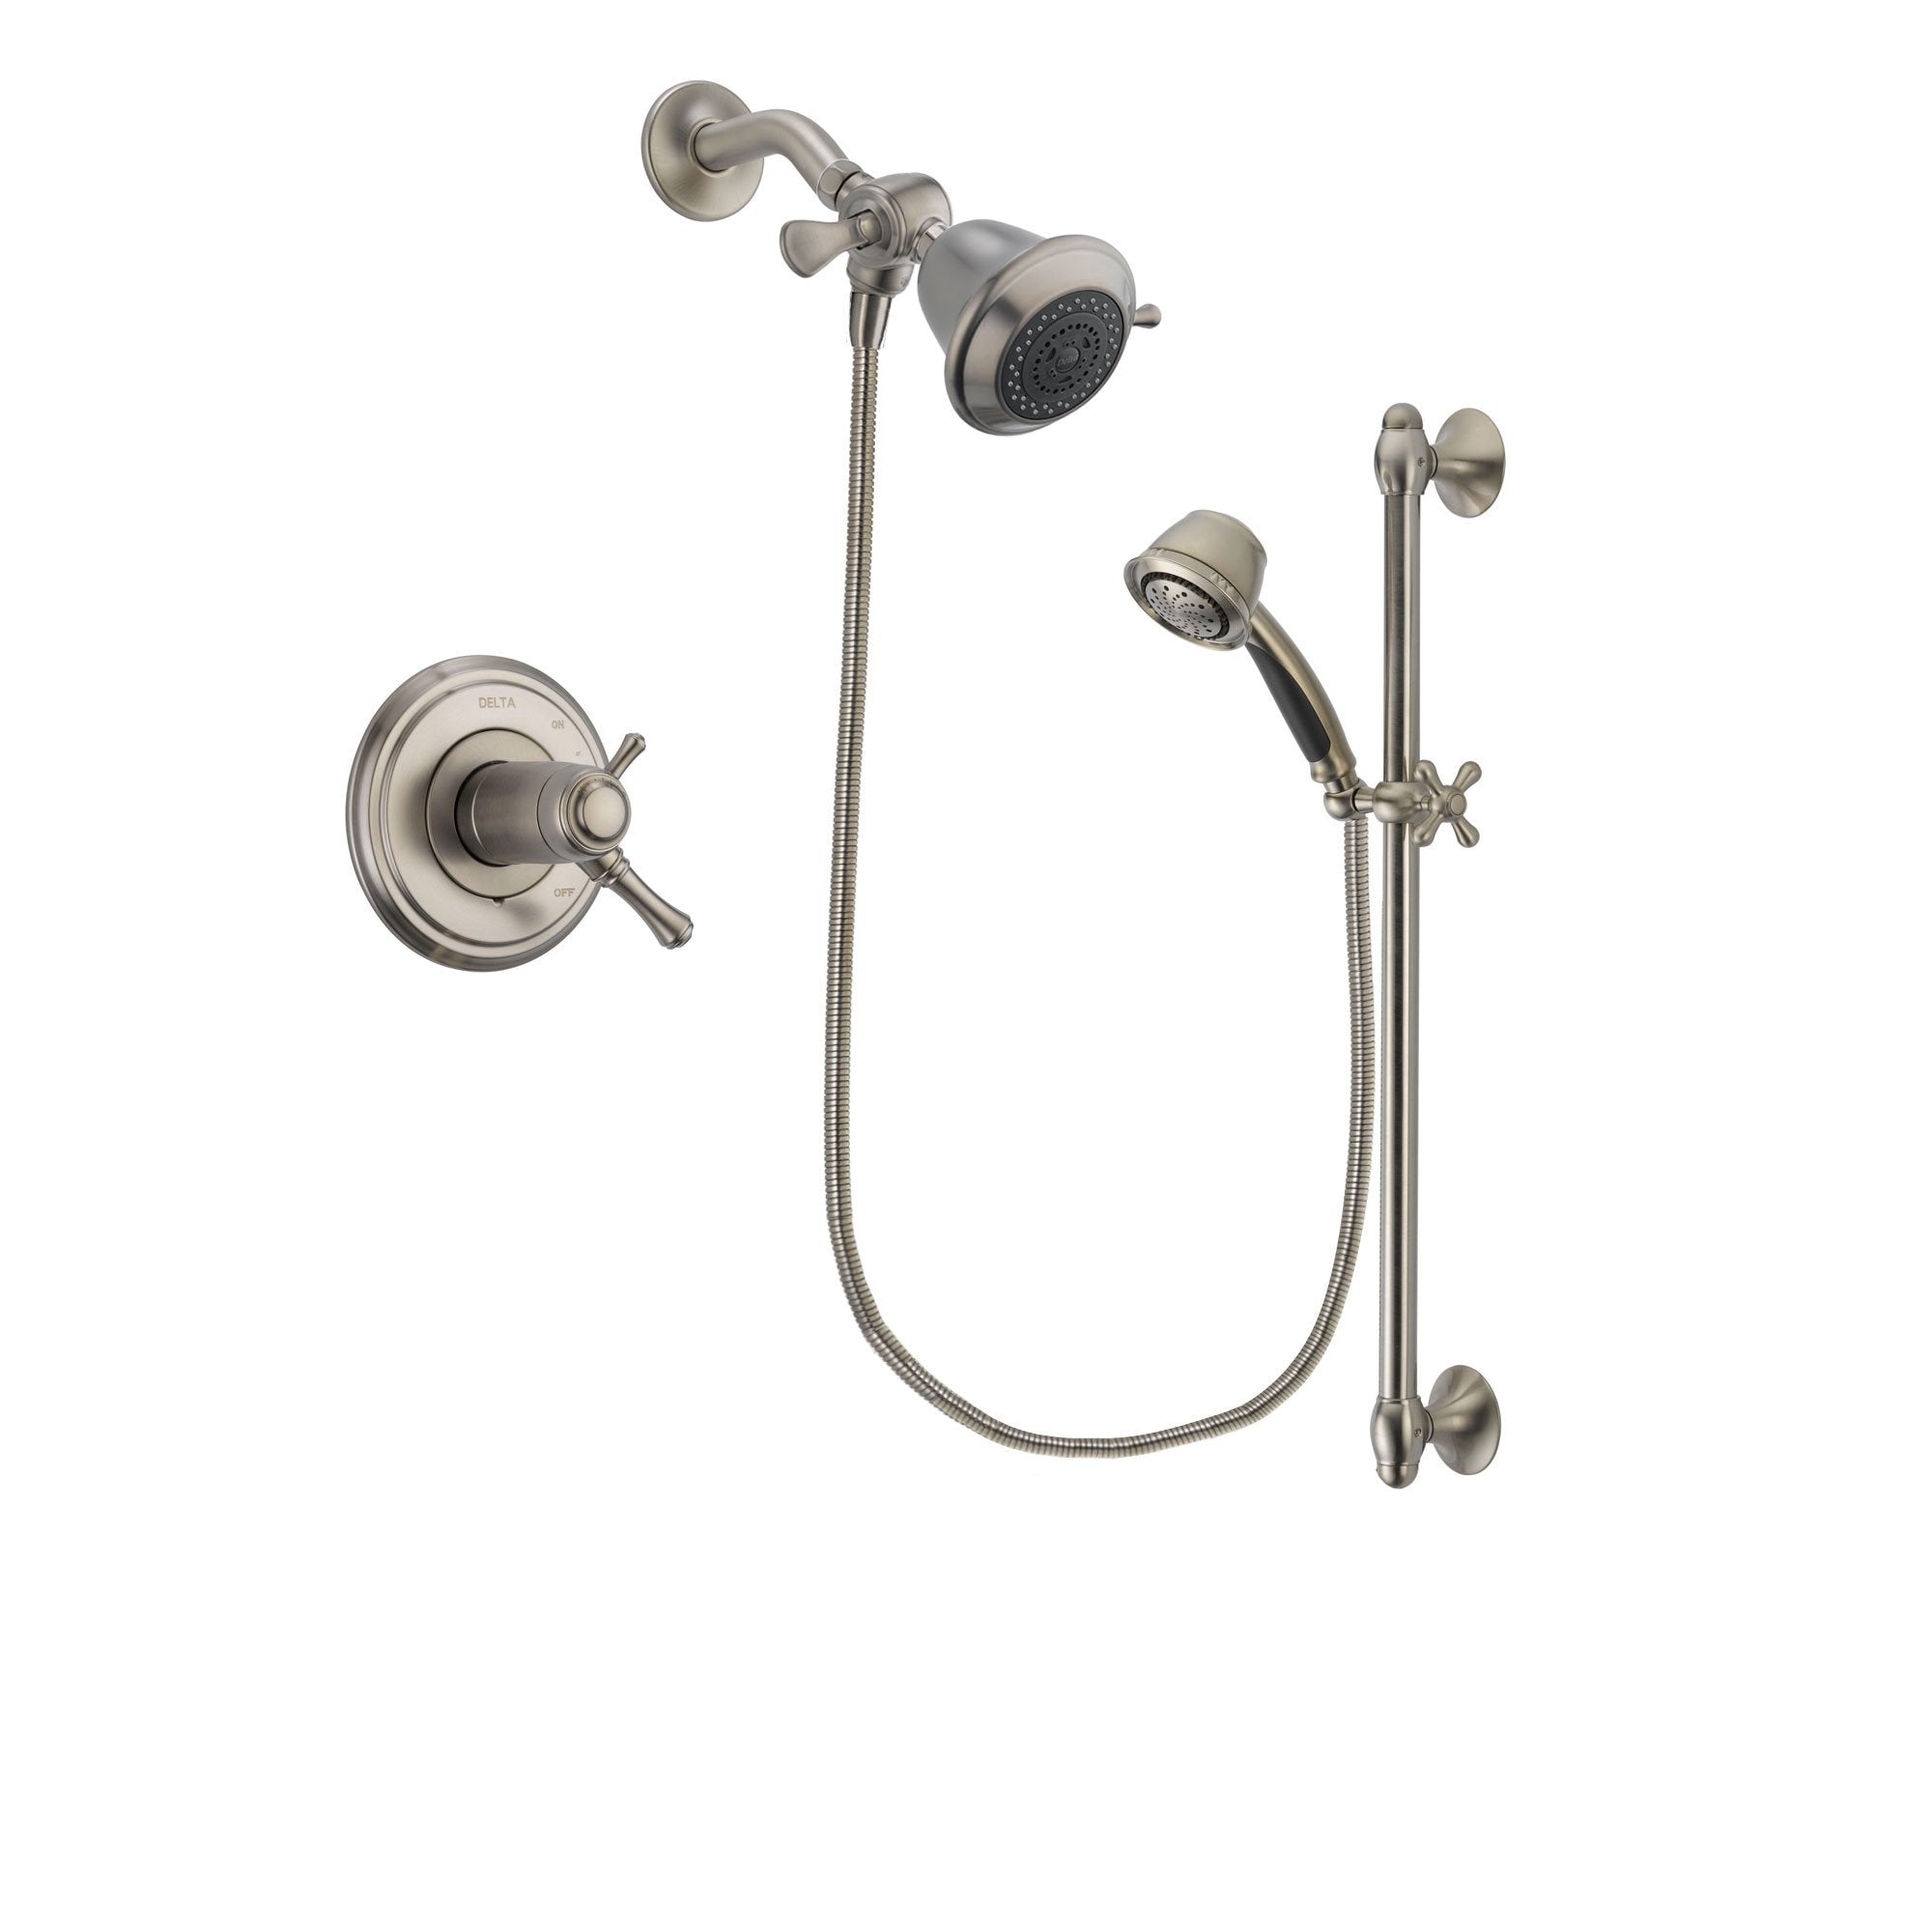 Delta Cassidy Stainless Steel Finish Thermostatic Shower Faucet System Package with Shower Head and 5-Spray Personal Handshower with Slide Bar Includes Rough-in Valve DSP1250V